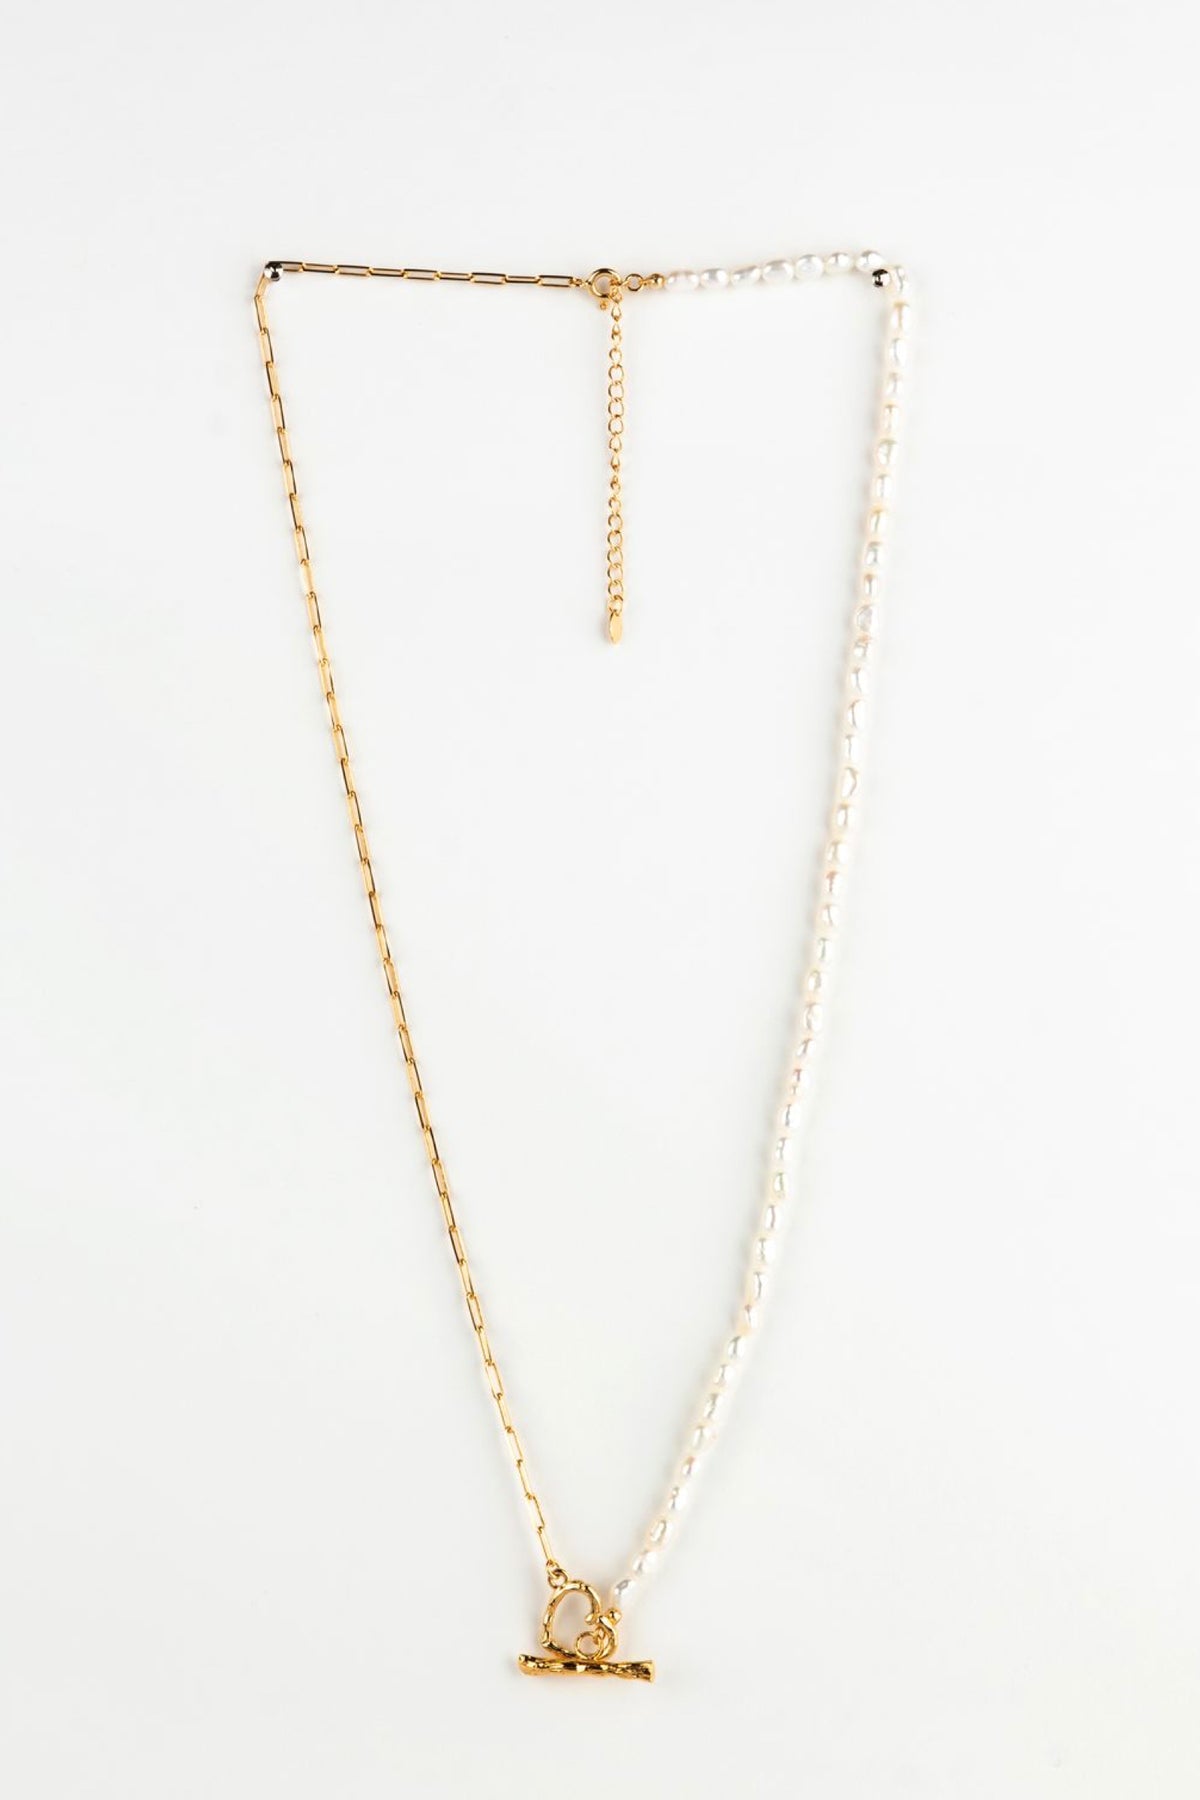 Half Gold Chain/Pearls Fob Necklace